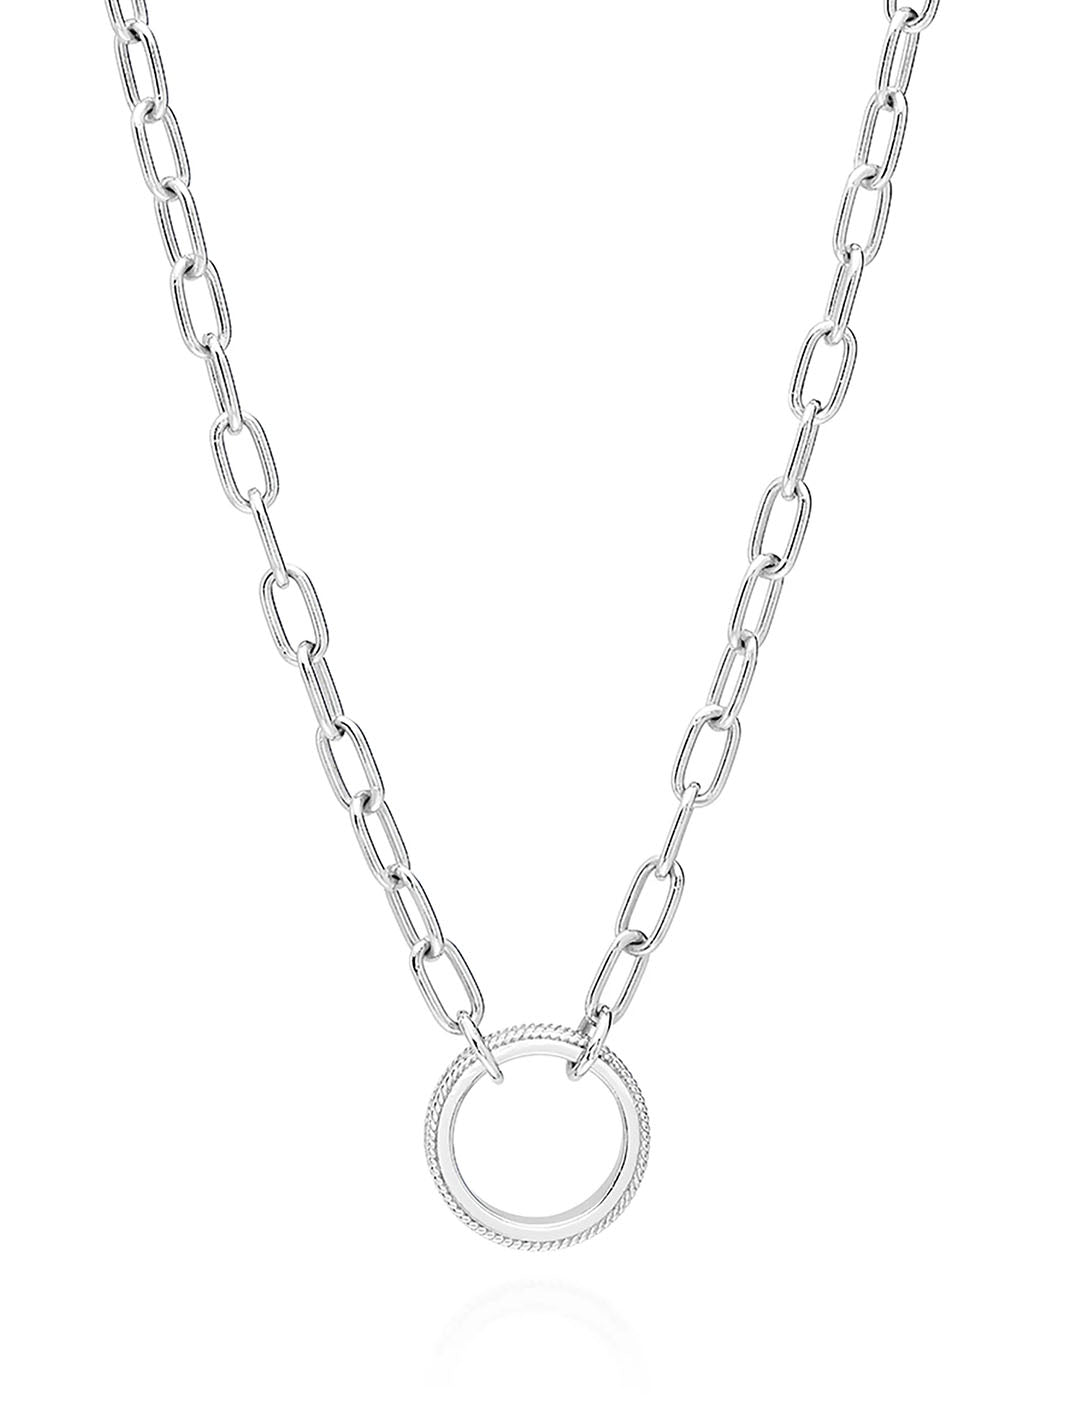 Open Chain Necklace in Silver